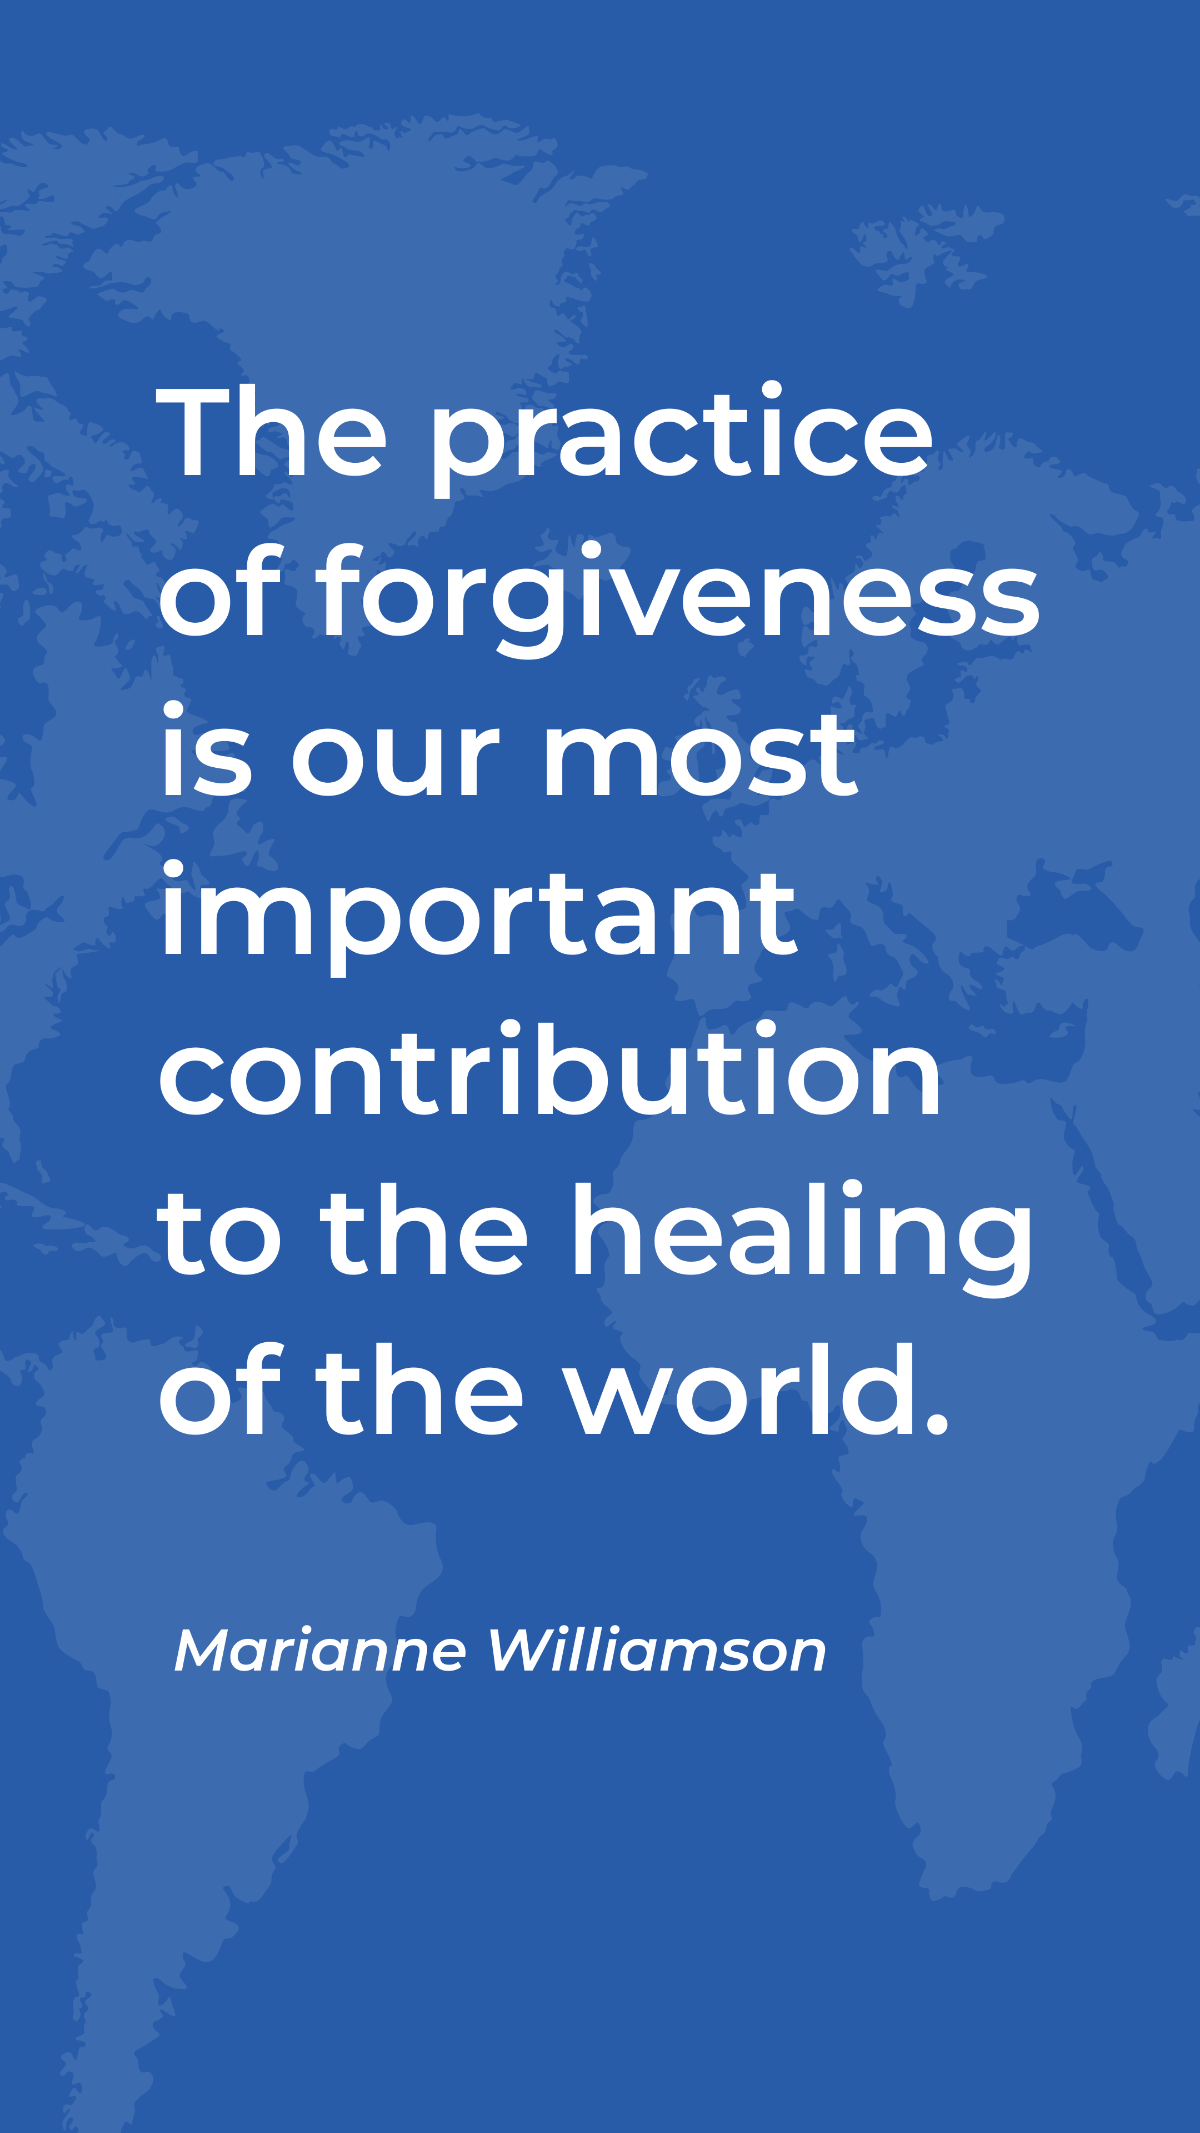 Free Marianne Williamson - The practice of forgiveness is our most important contribution to the healing of the world. Template